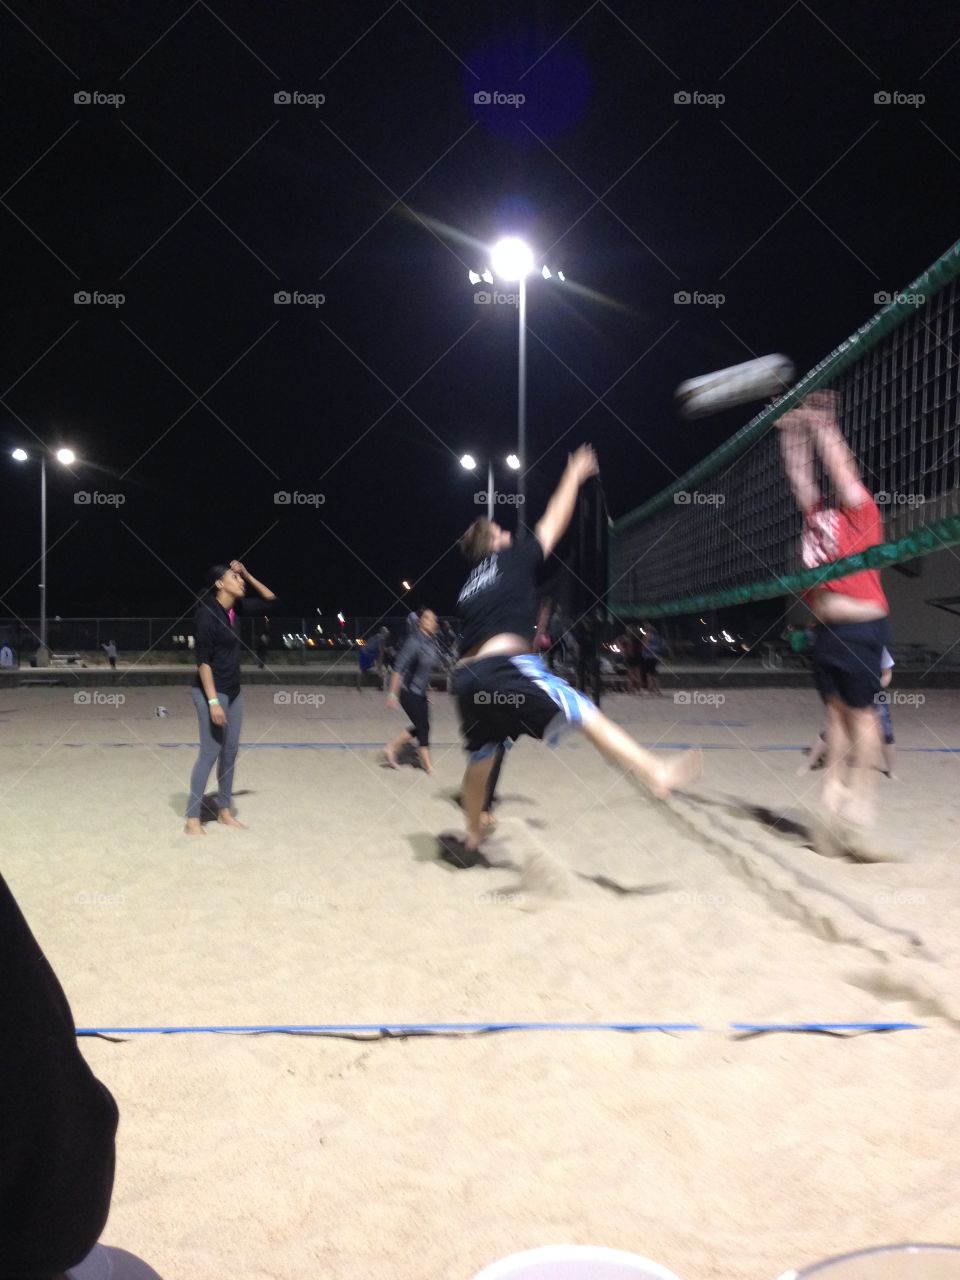 Sand volleyball at night